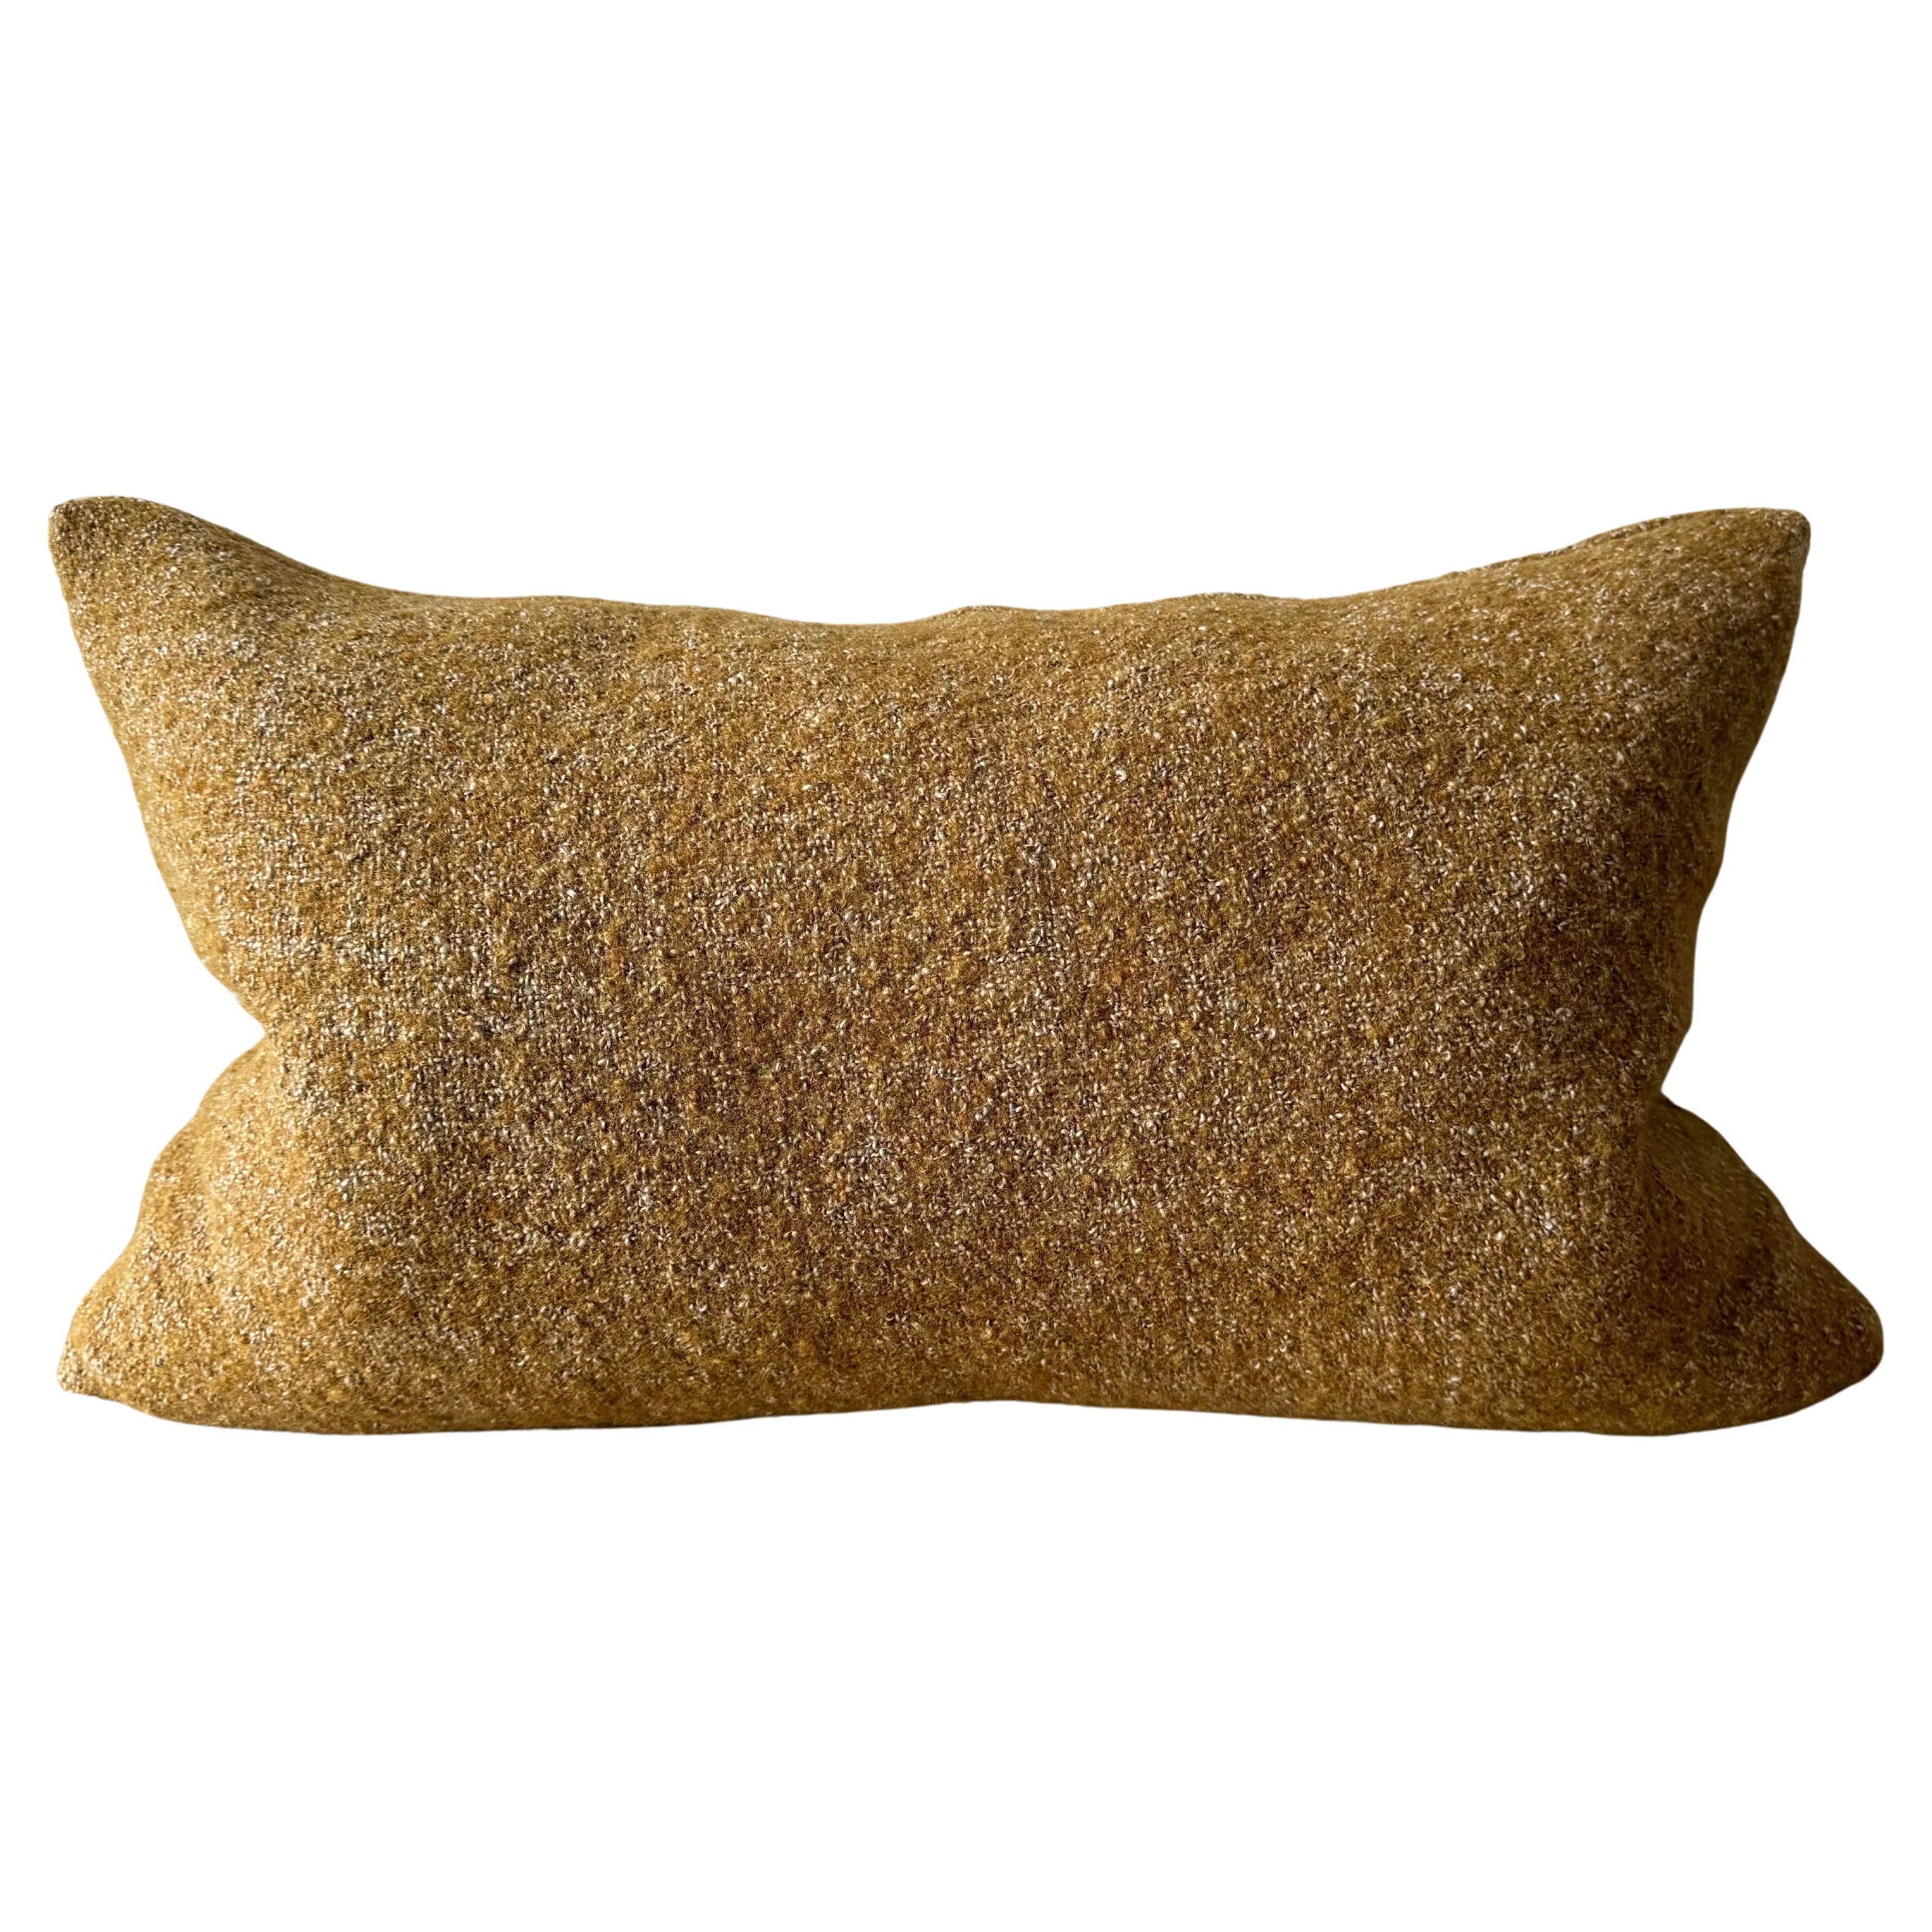 Custom Linen and Wool Lumbar Pillow in Ginger with Down Feather Insert